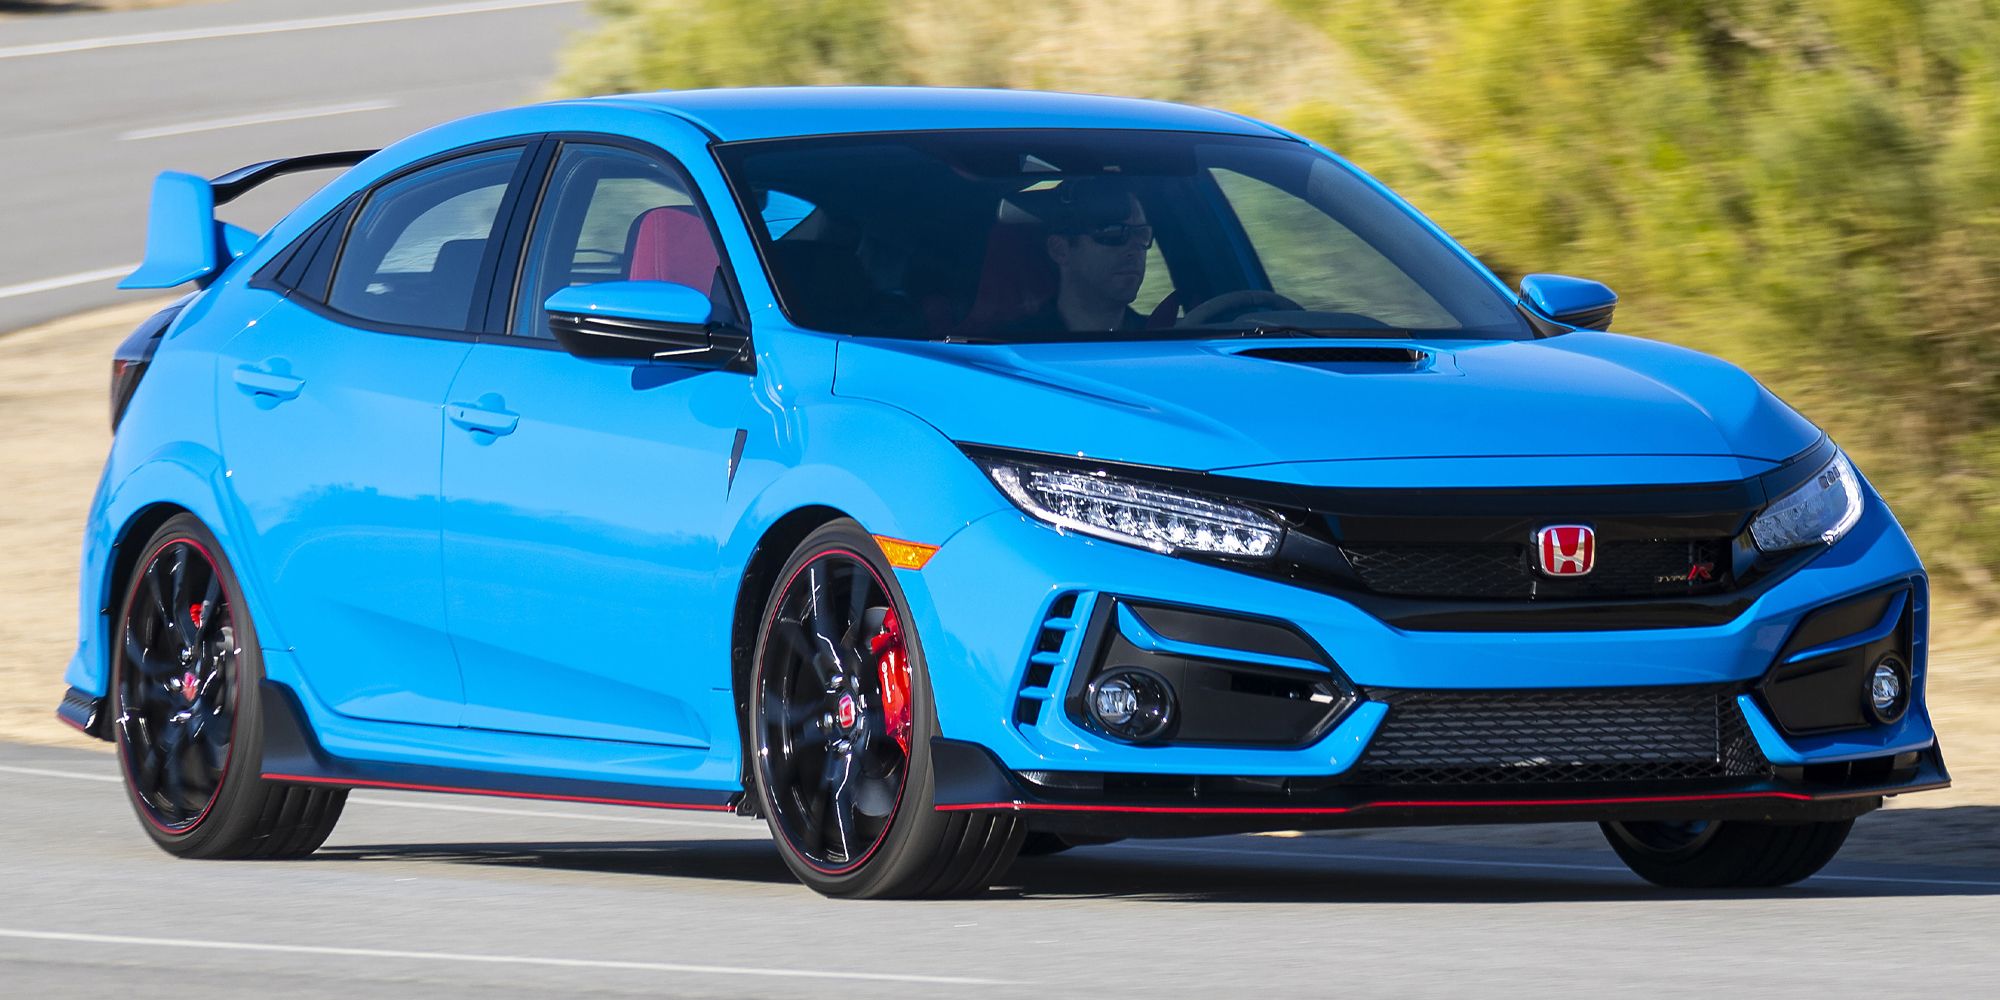 A blue FK8 Type R on the move